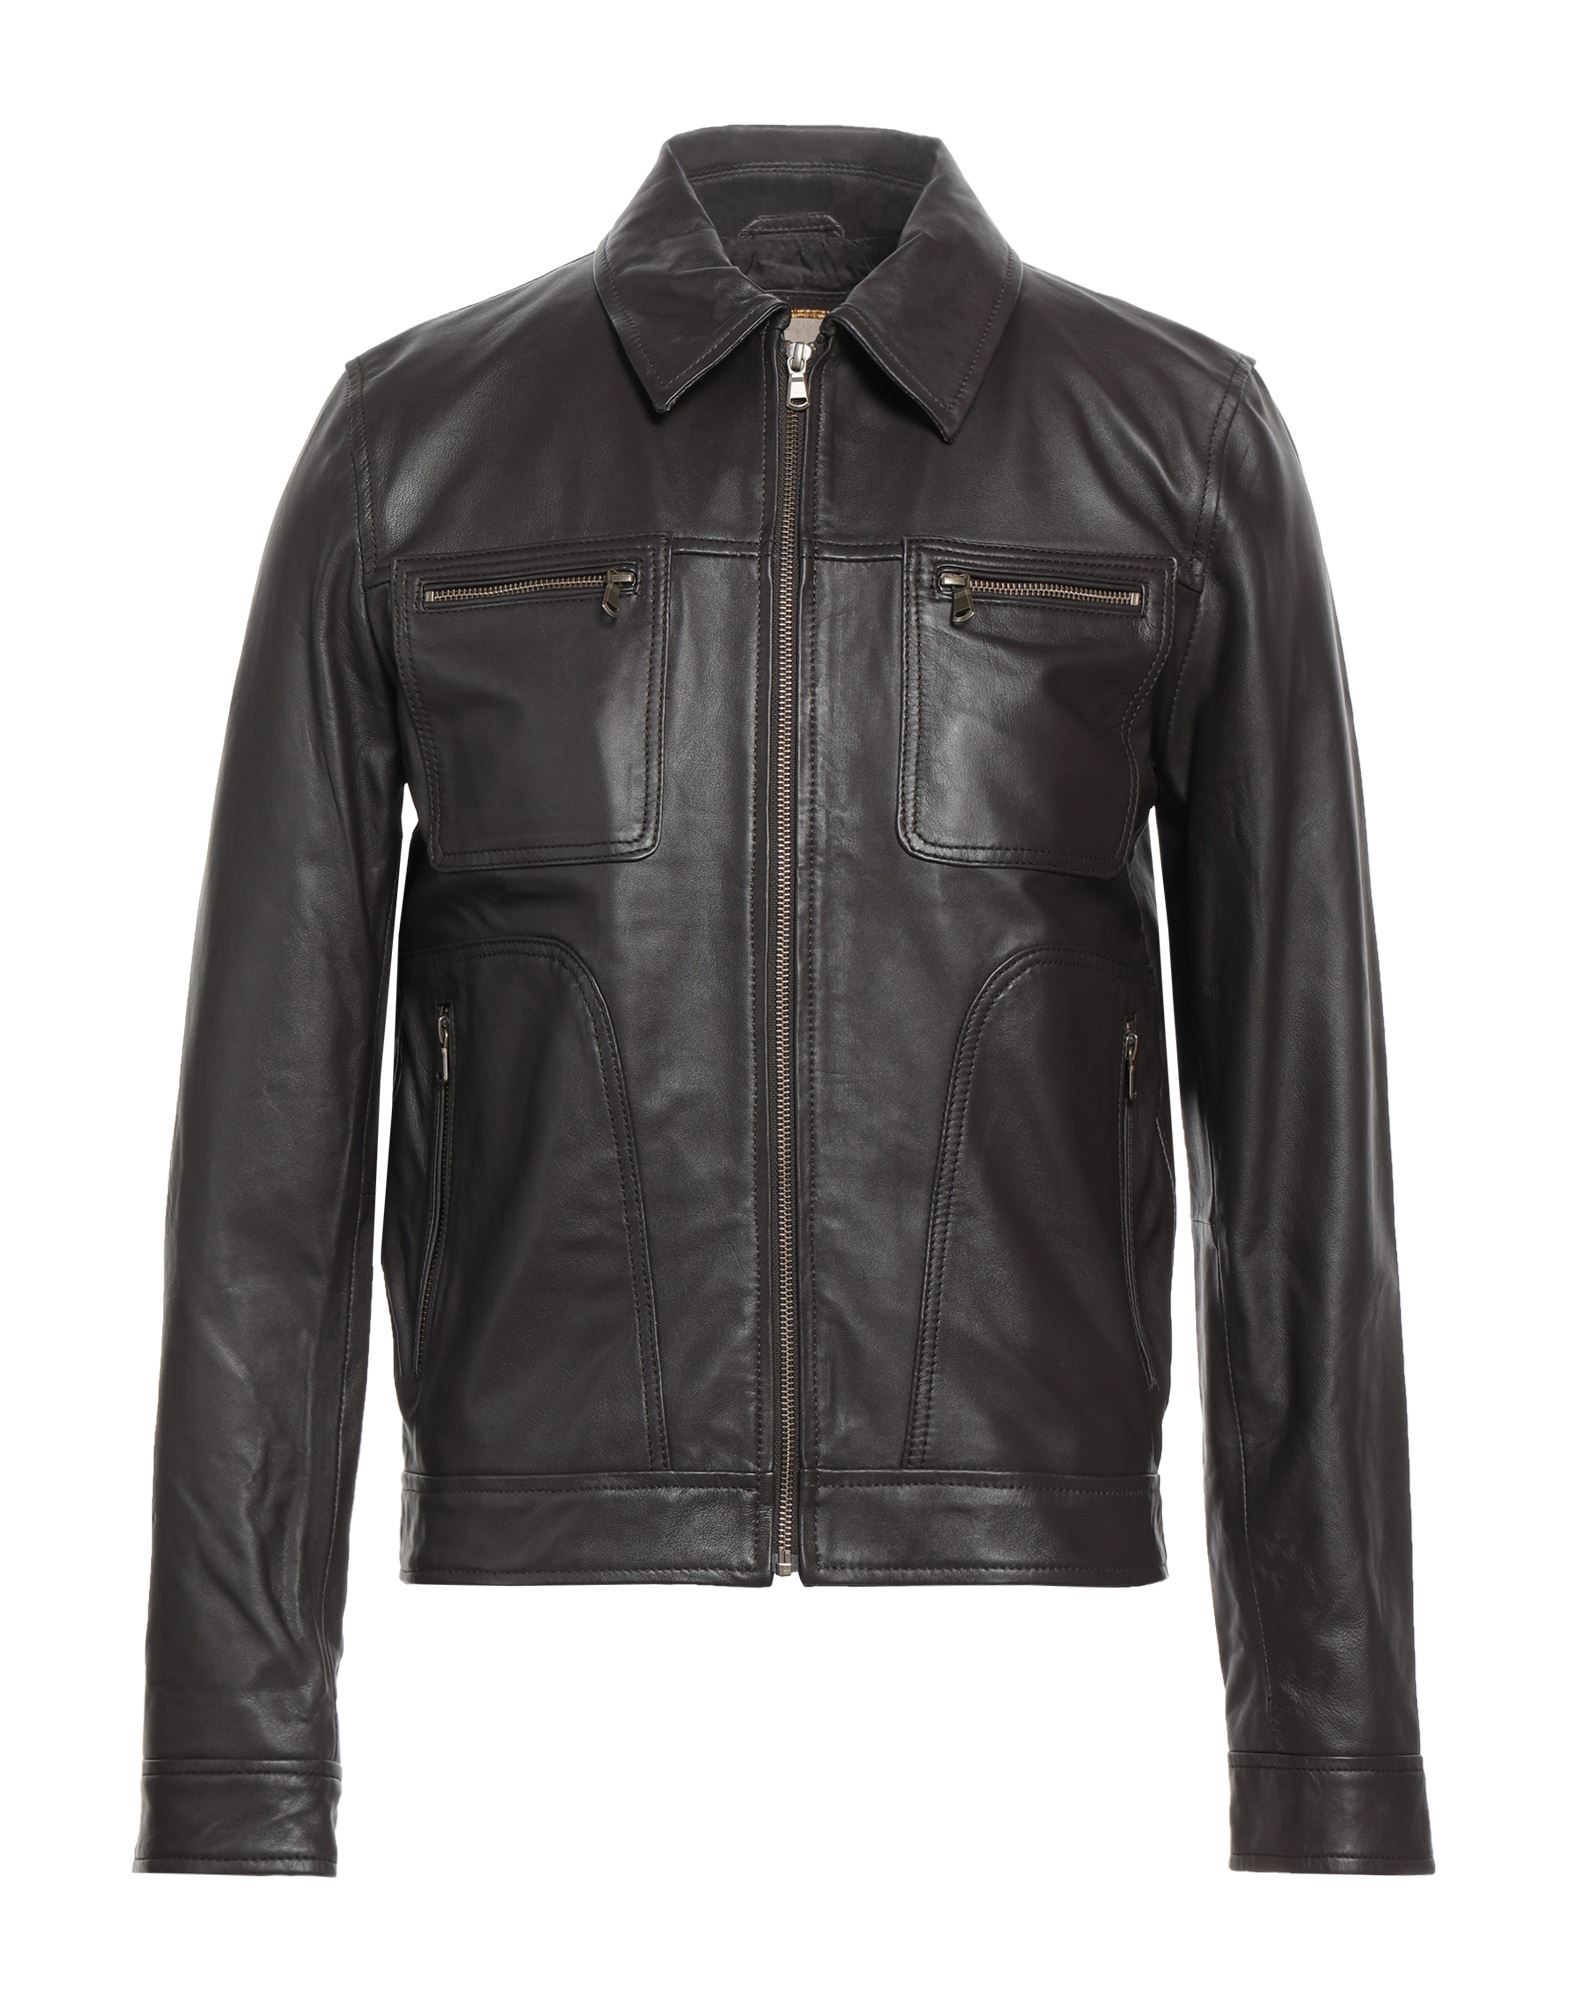 Andrea D'amico Man Jacket Dark Brown Size 46 Leather